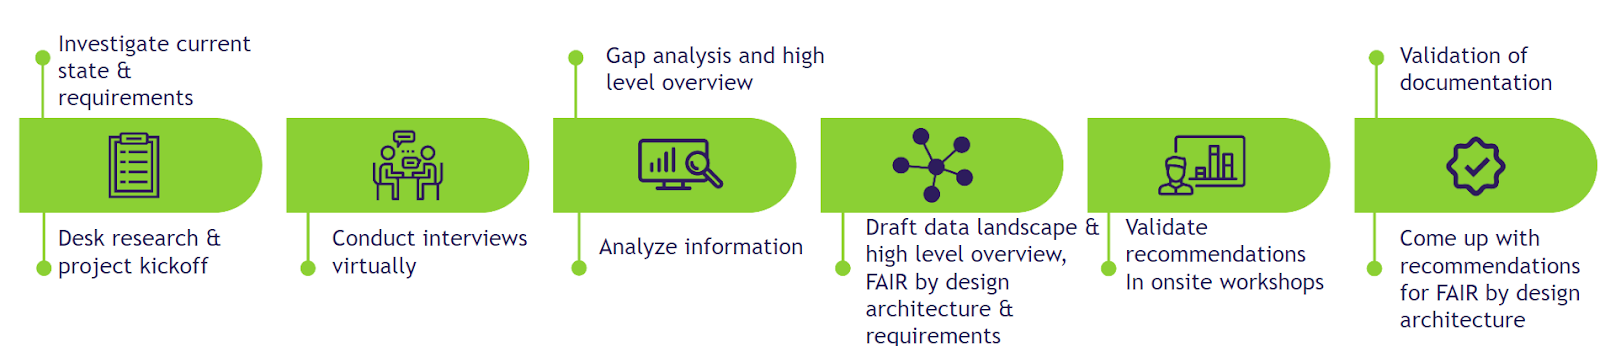 Figure 3: FAIR by Design architecture project approach